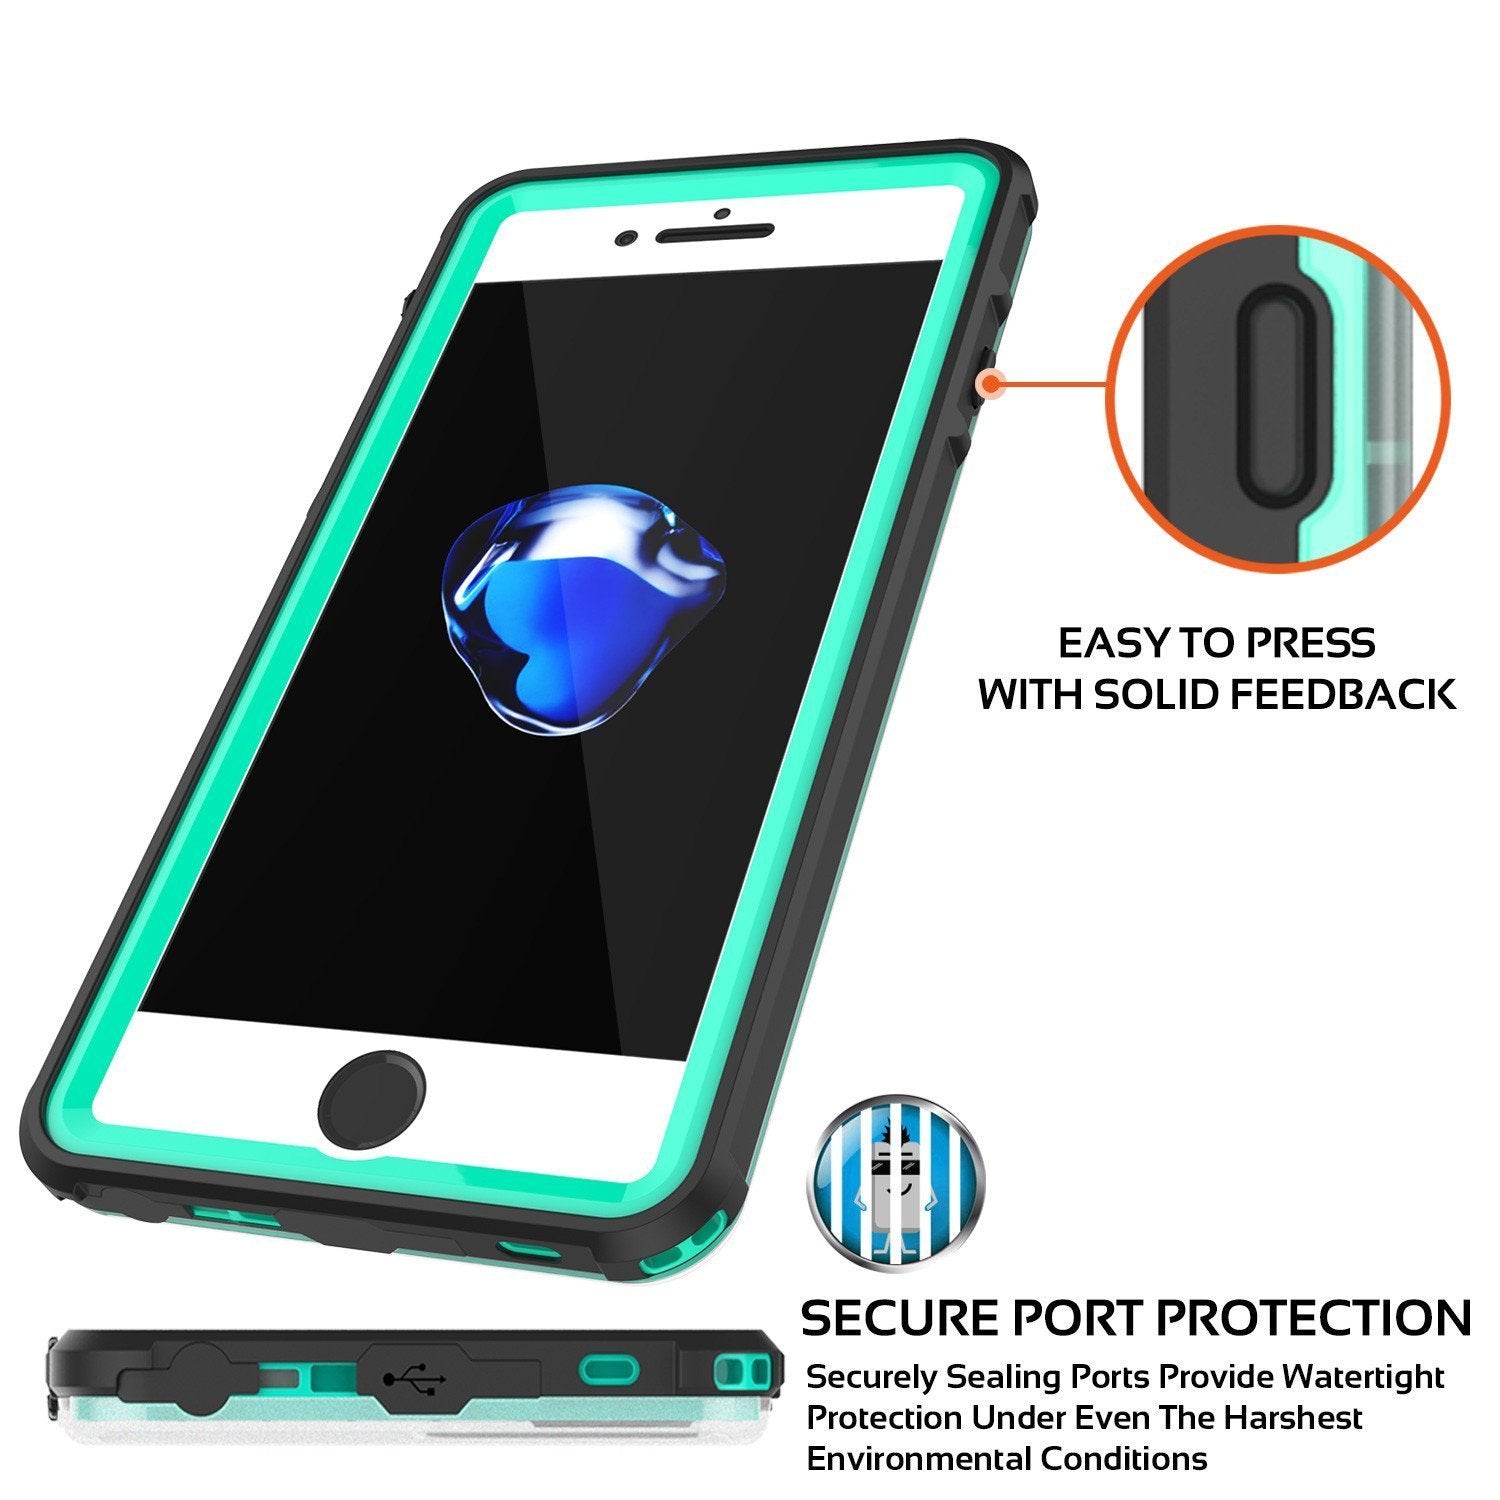 Apple iPhone SE (4.7") Waterproof Case, PUNKcase CRYSTAL Teal W/ Attached Screen Protector  | Warranty